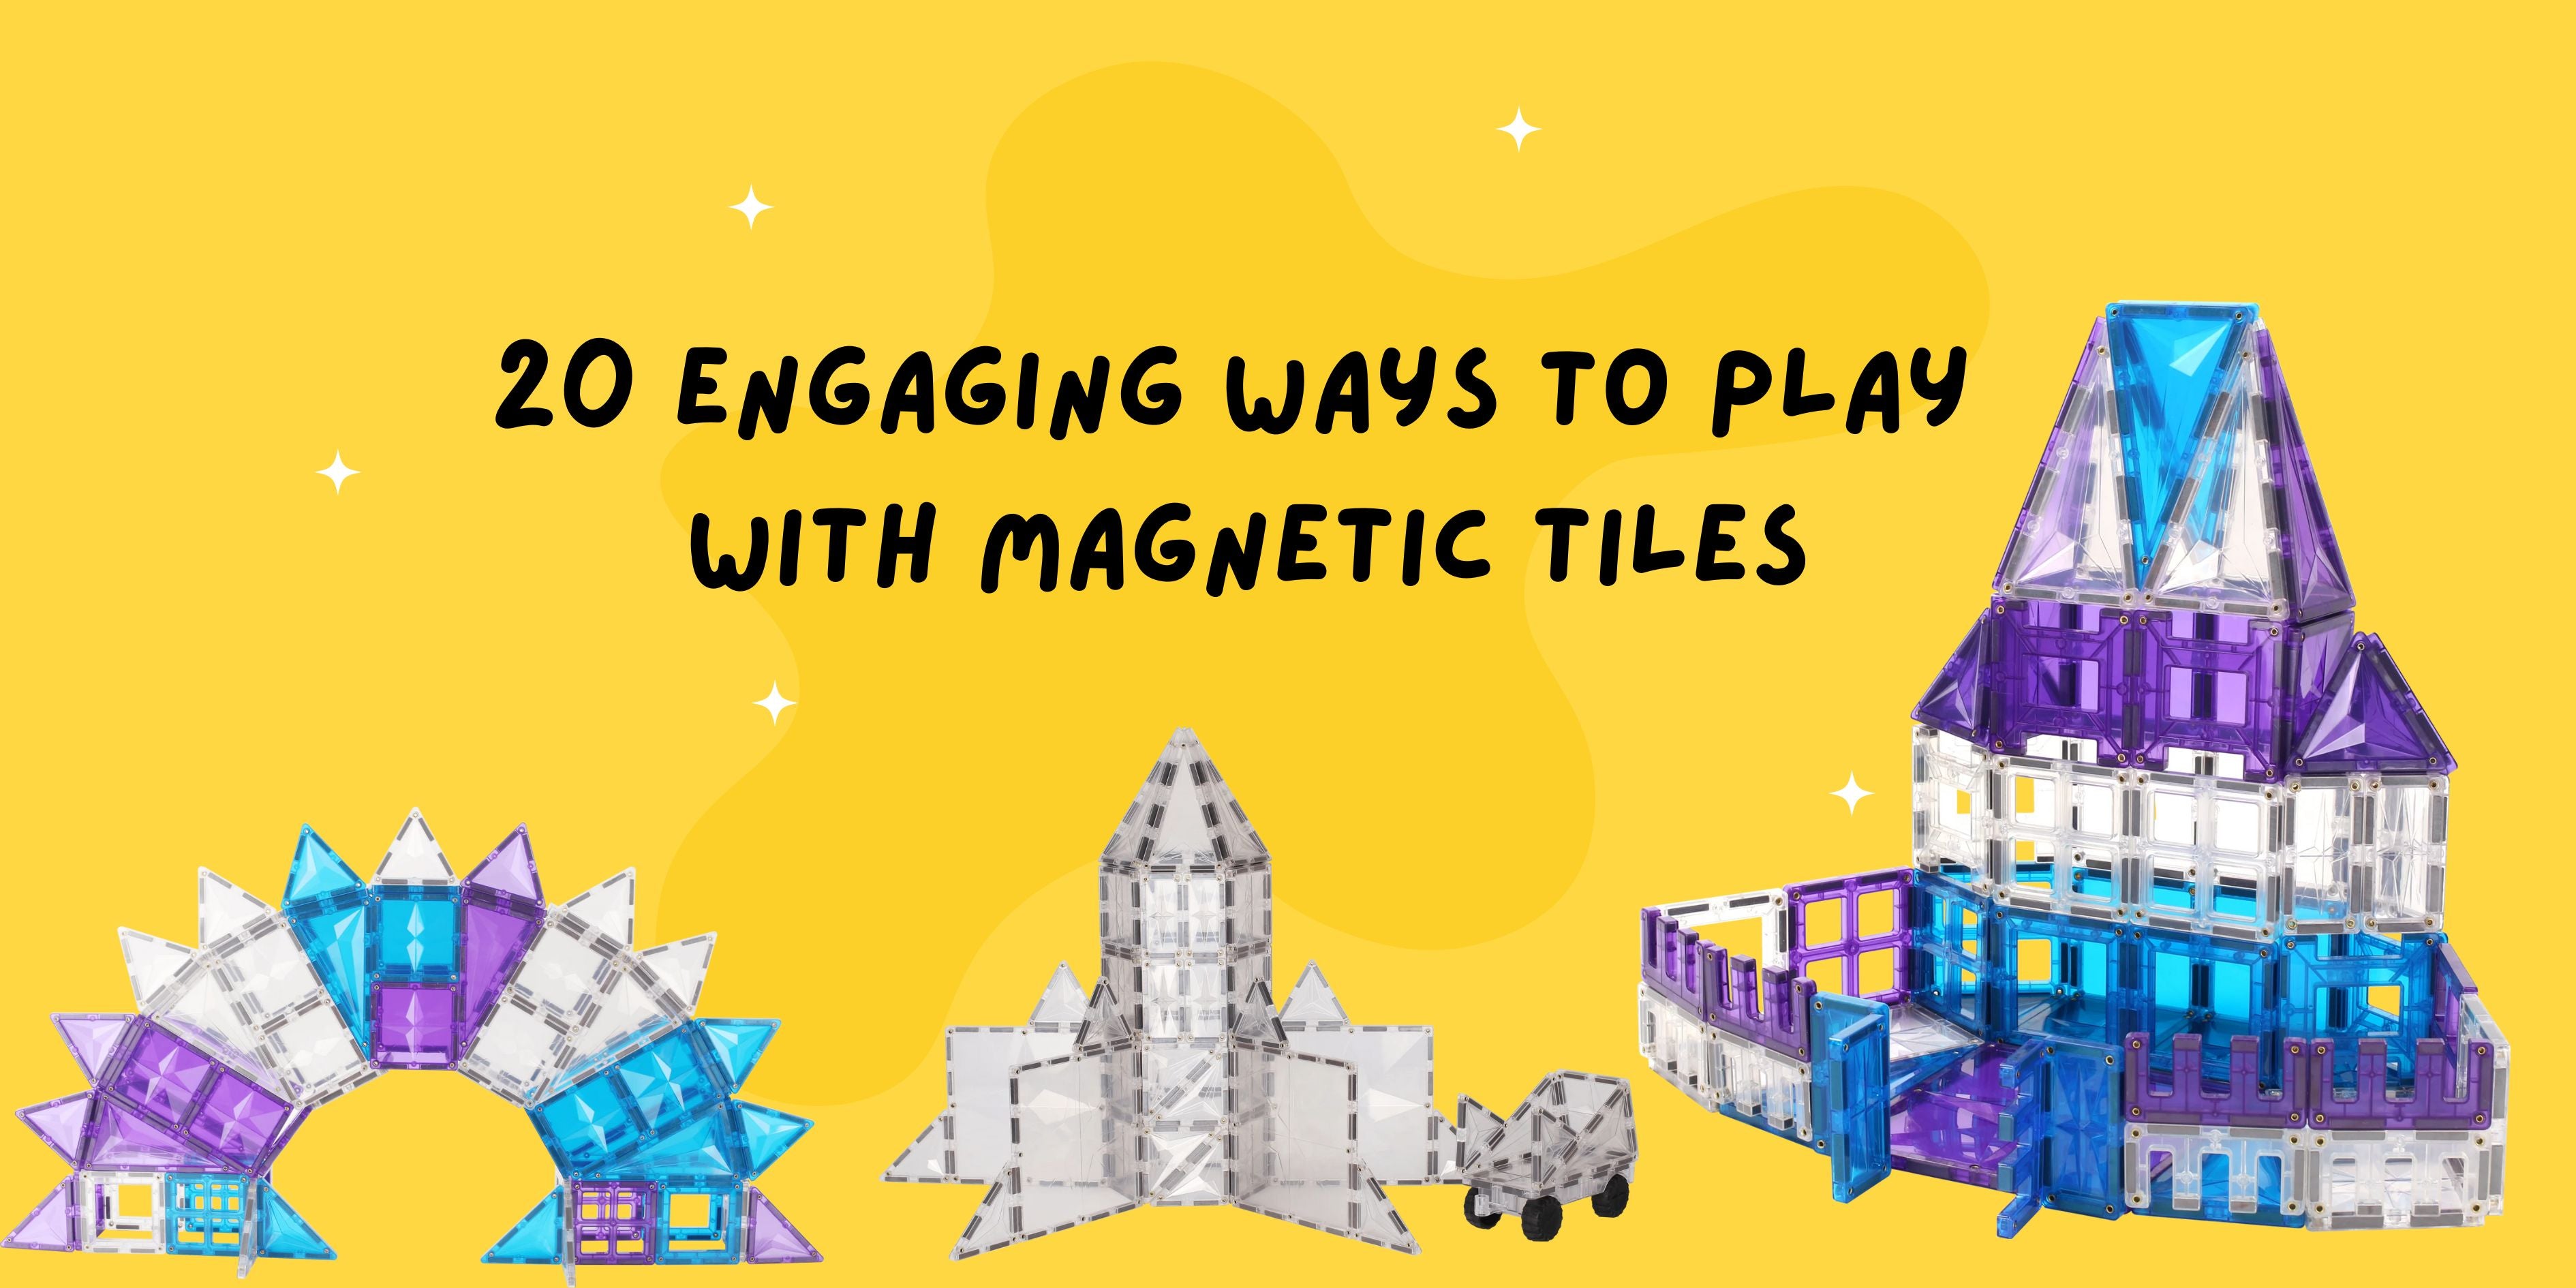 What are the benefits of Magnetic Tiles in Open Ended Play?